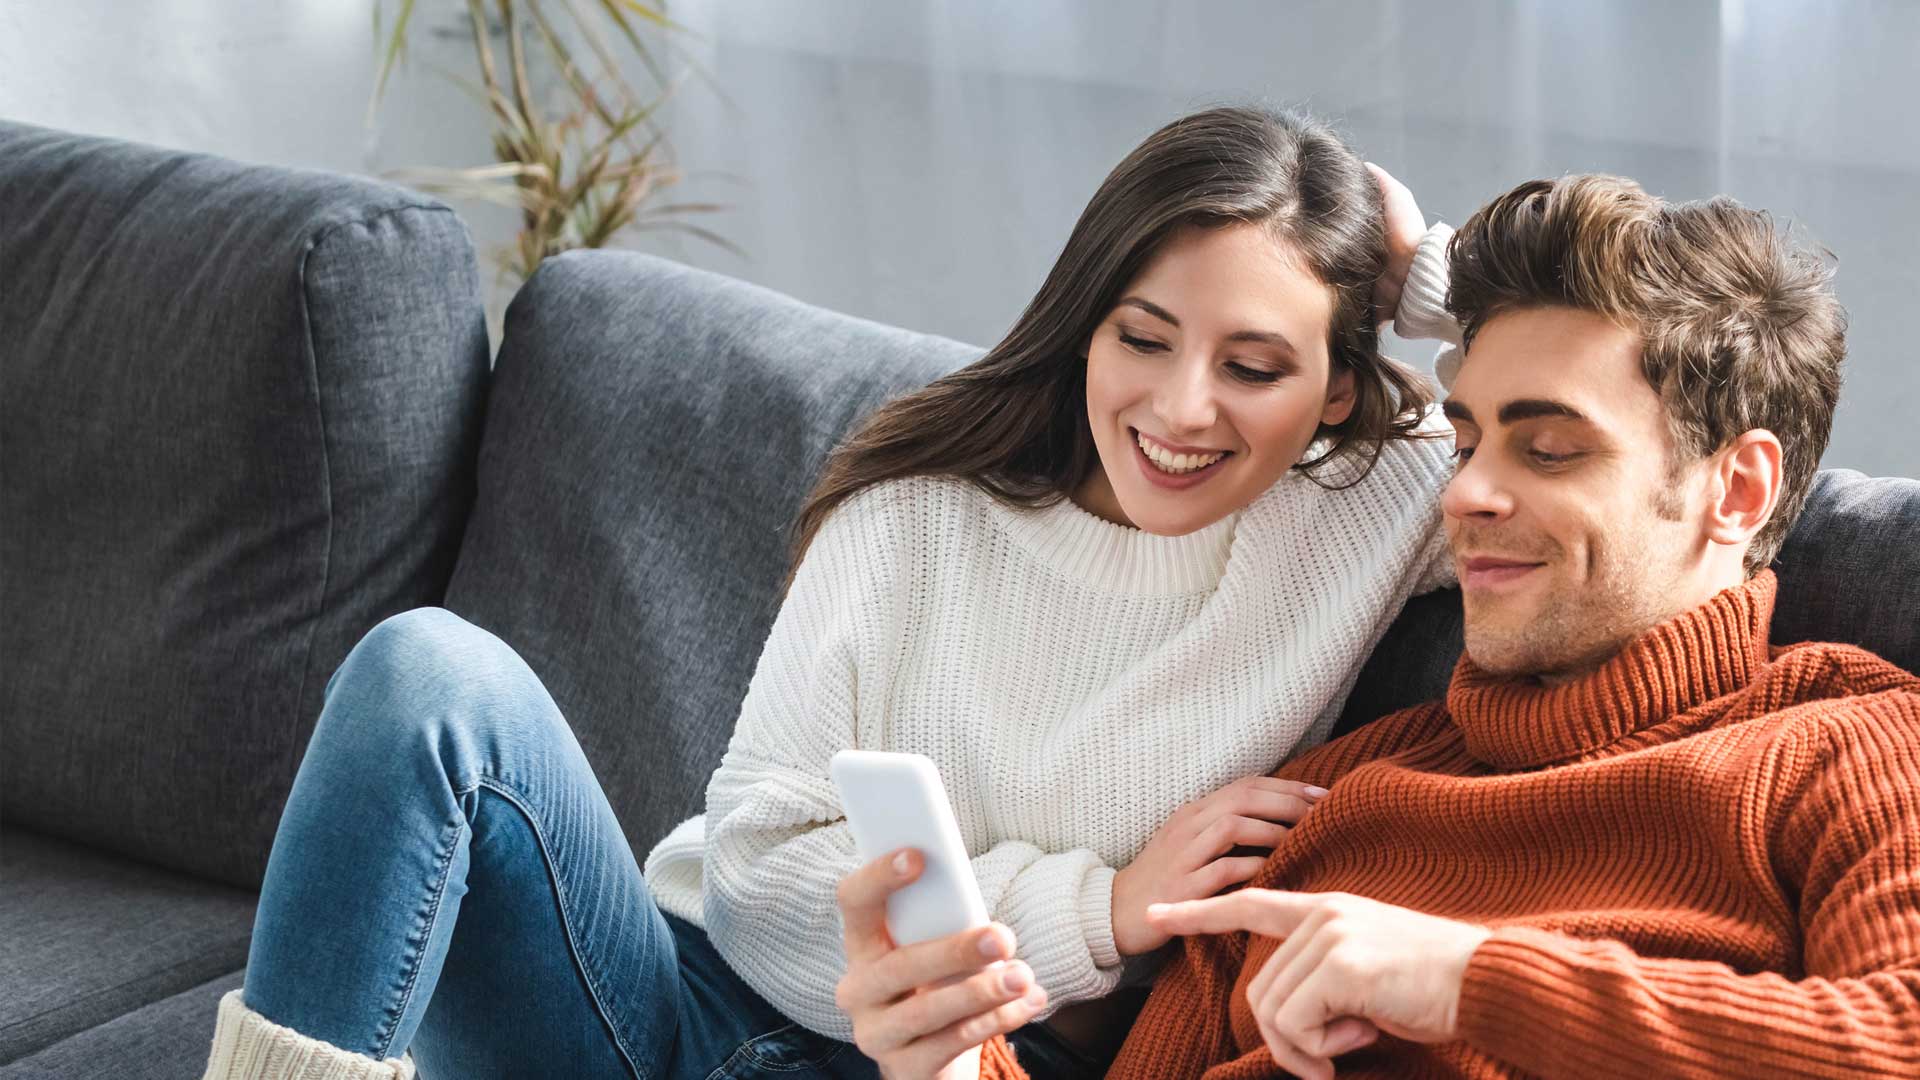 couple-on-couch-smiling-at-phone-2